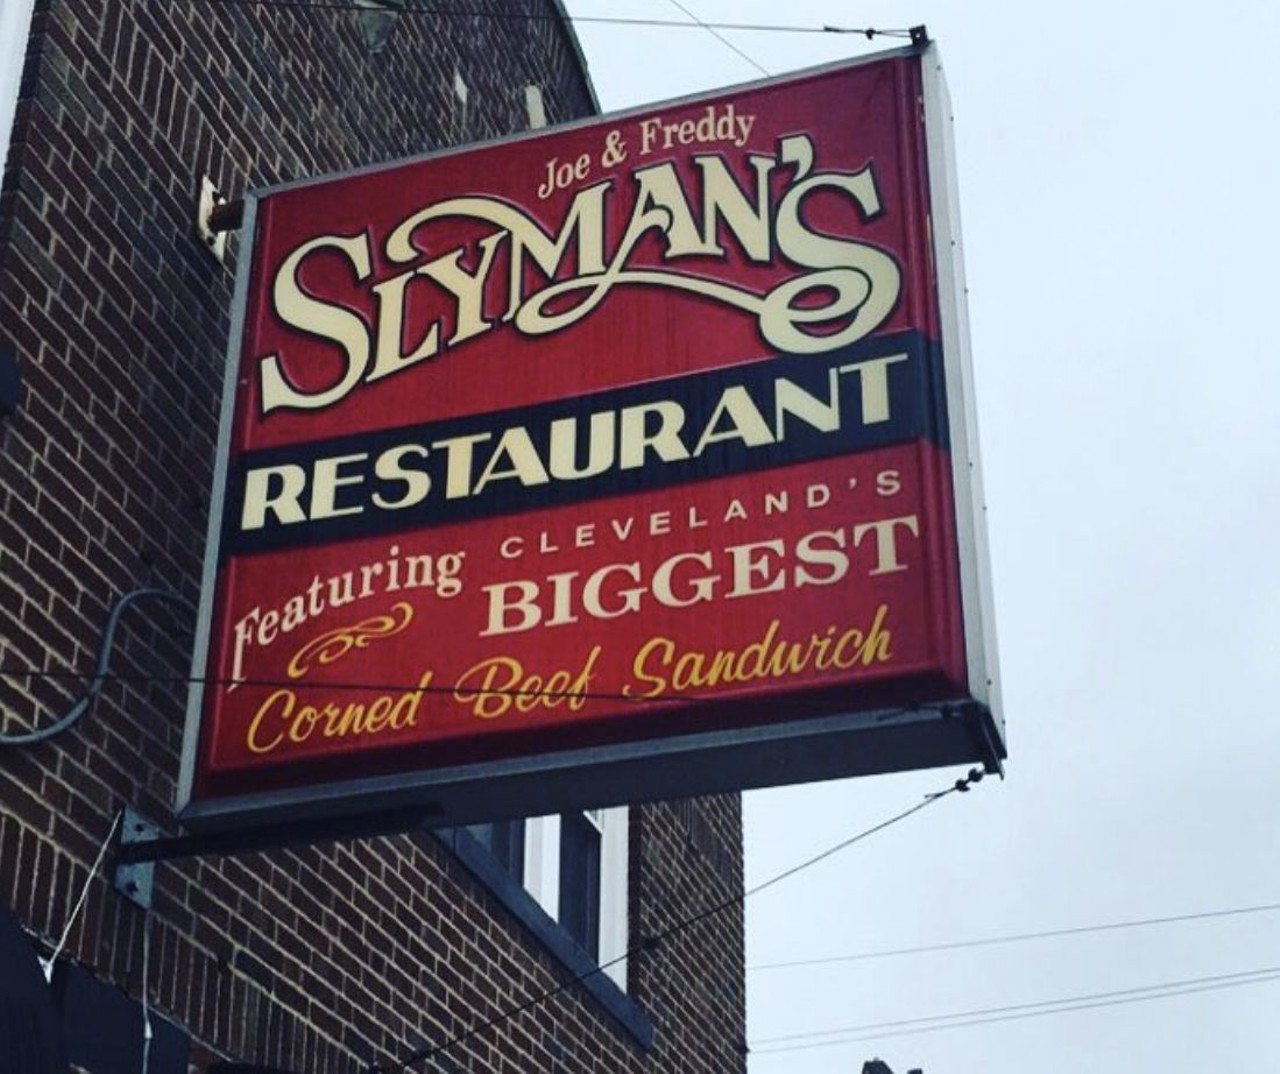 Corned Beef on Rye
Where:  Slyman's has long been the home of Cleveland's best-loved corned beef, but Jack's Deli, Corky & Lenny's and Mr. Brisket ain't chopped liver either
Photo via Scene Archives